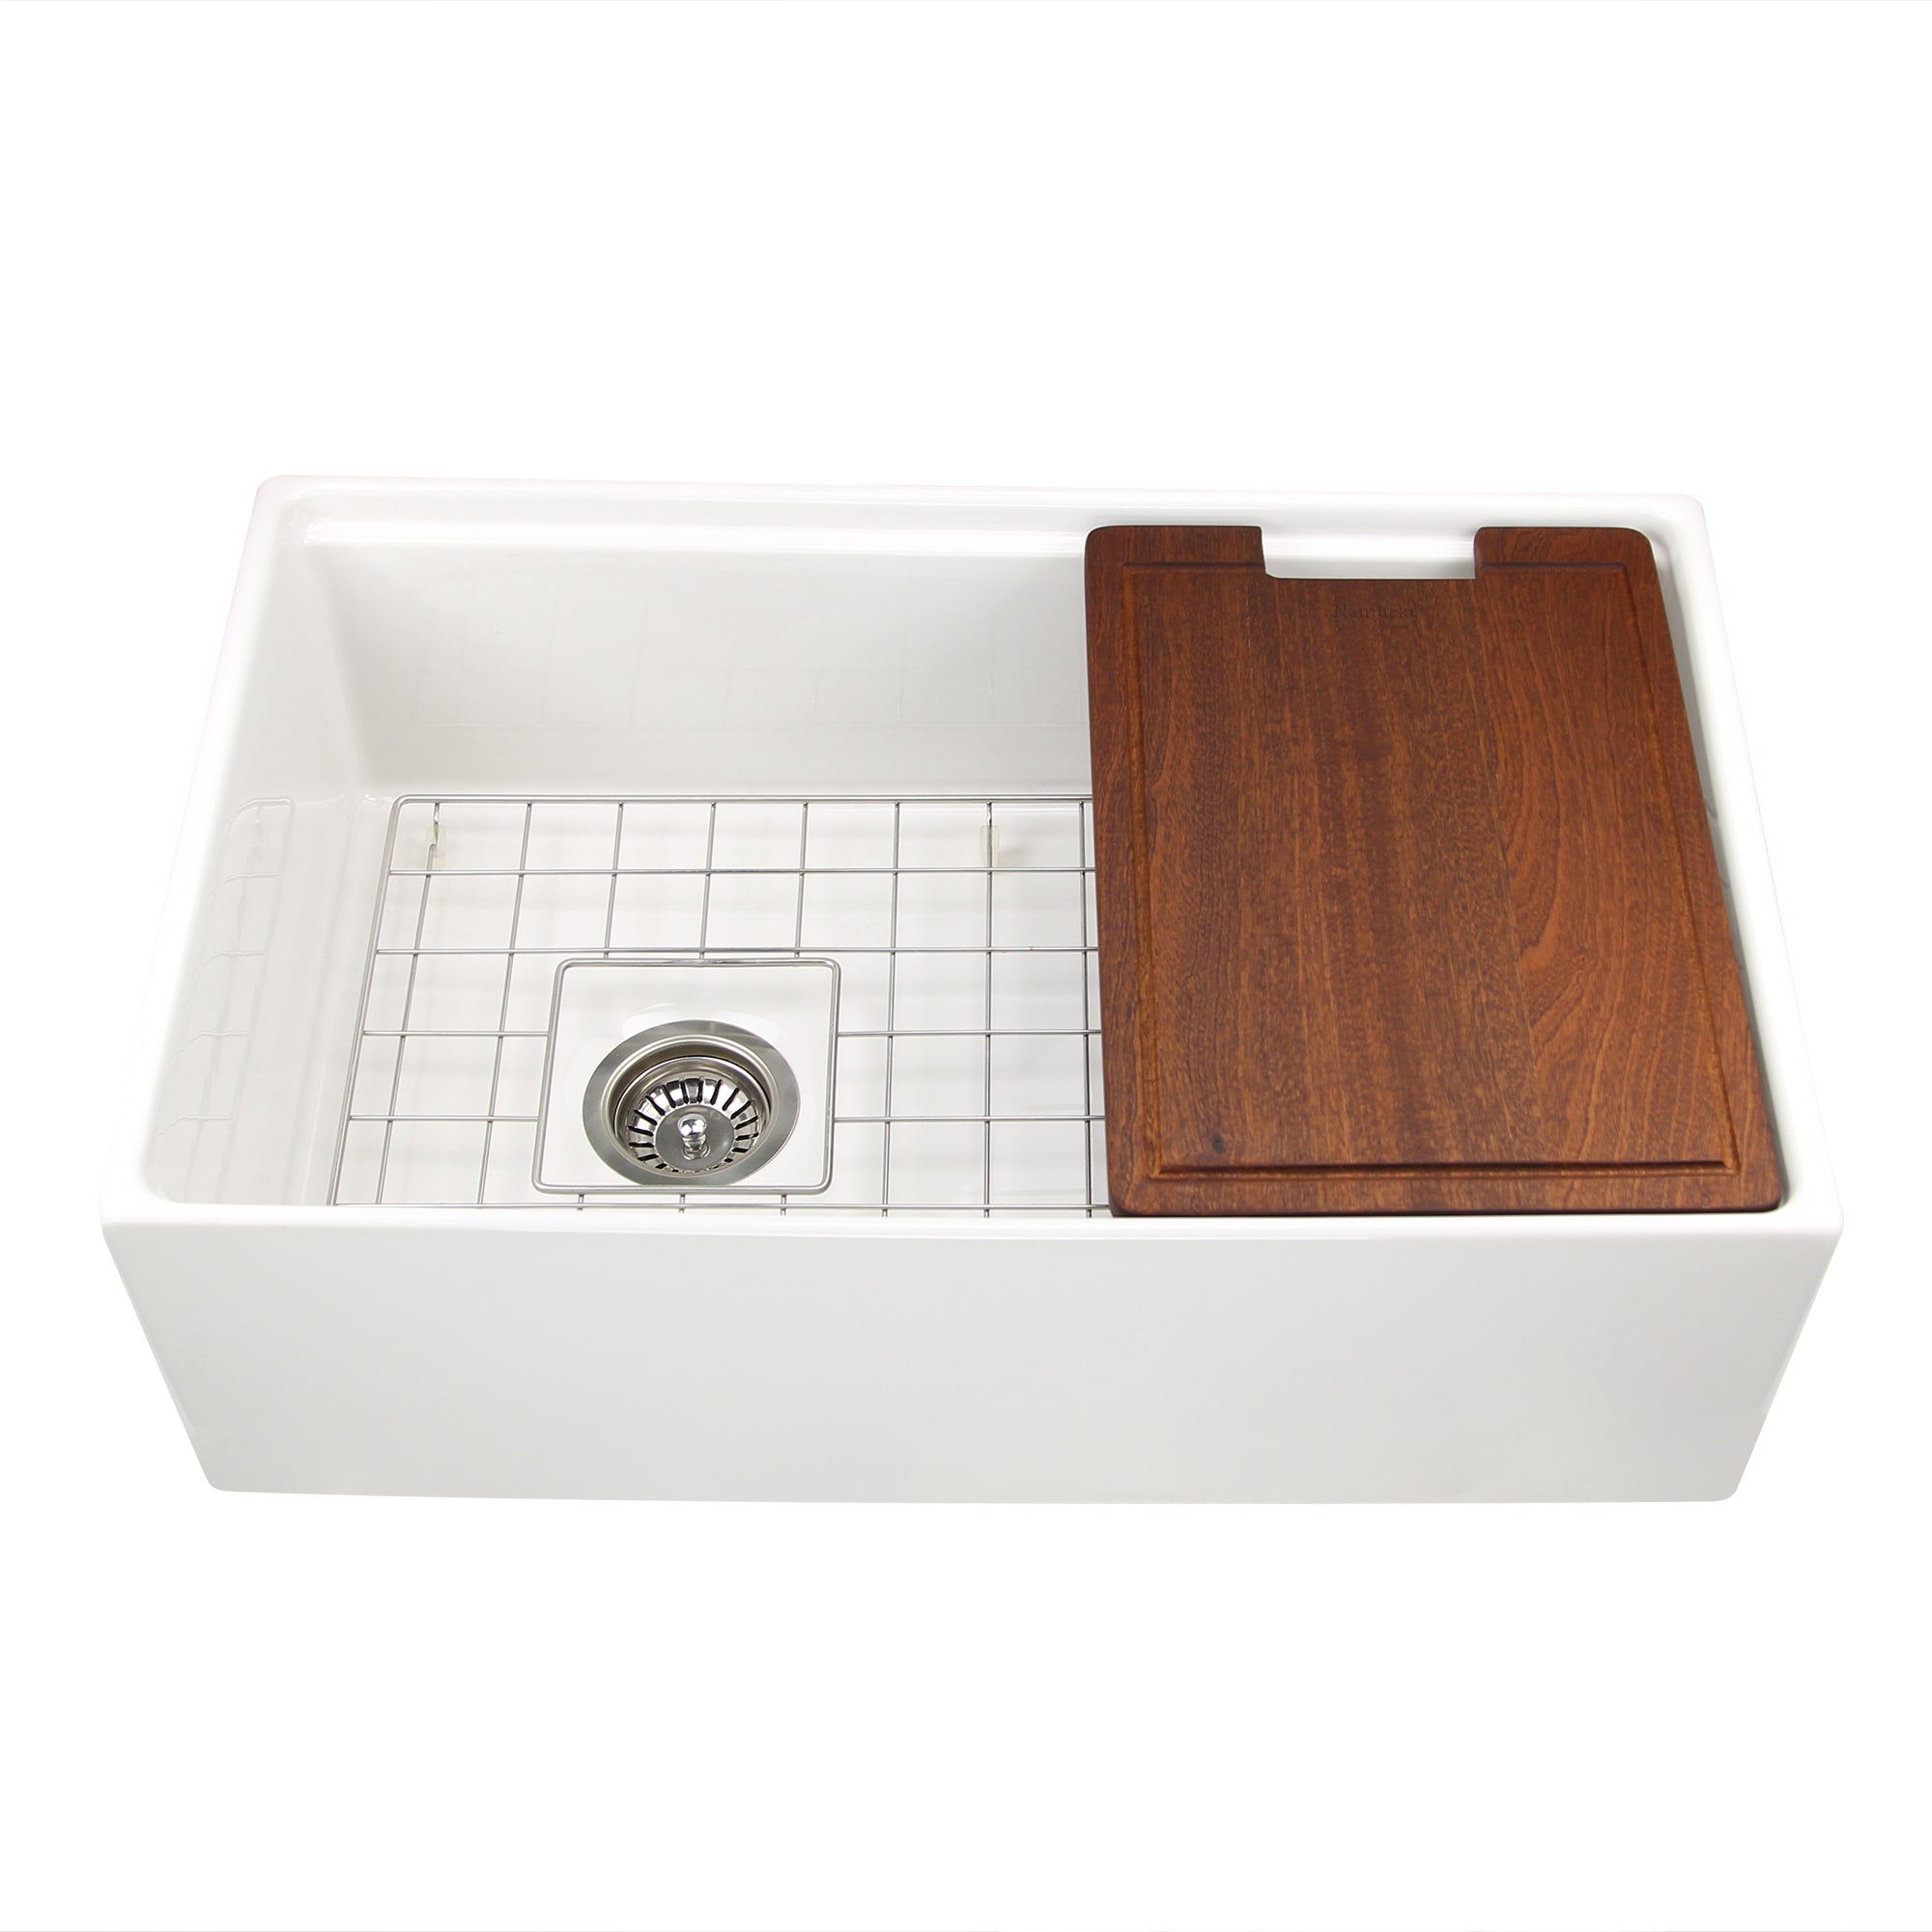 Nantucket Sinks 30 Inch Reversible Workstation Farmhouse Fireclay Sink with Offset Drain and Accessories